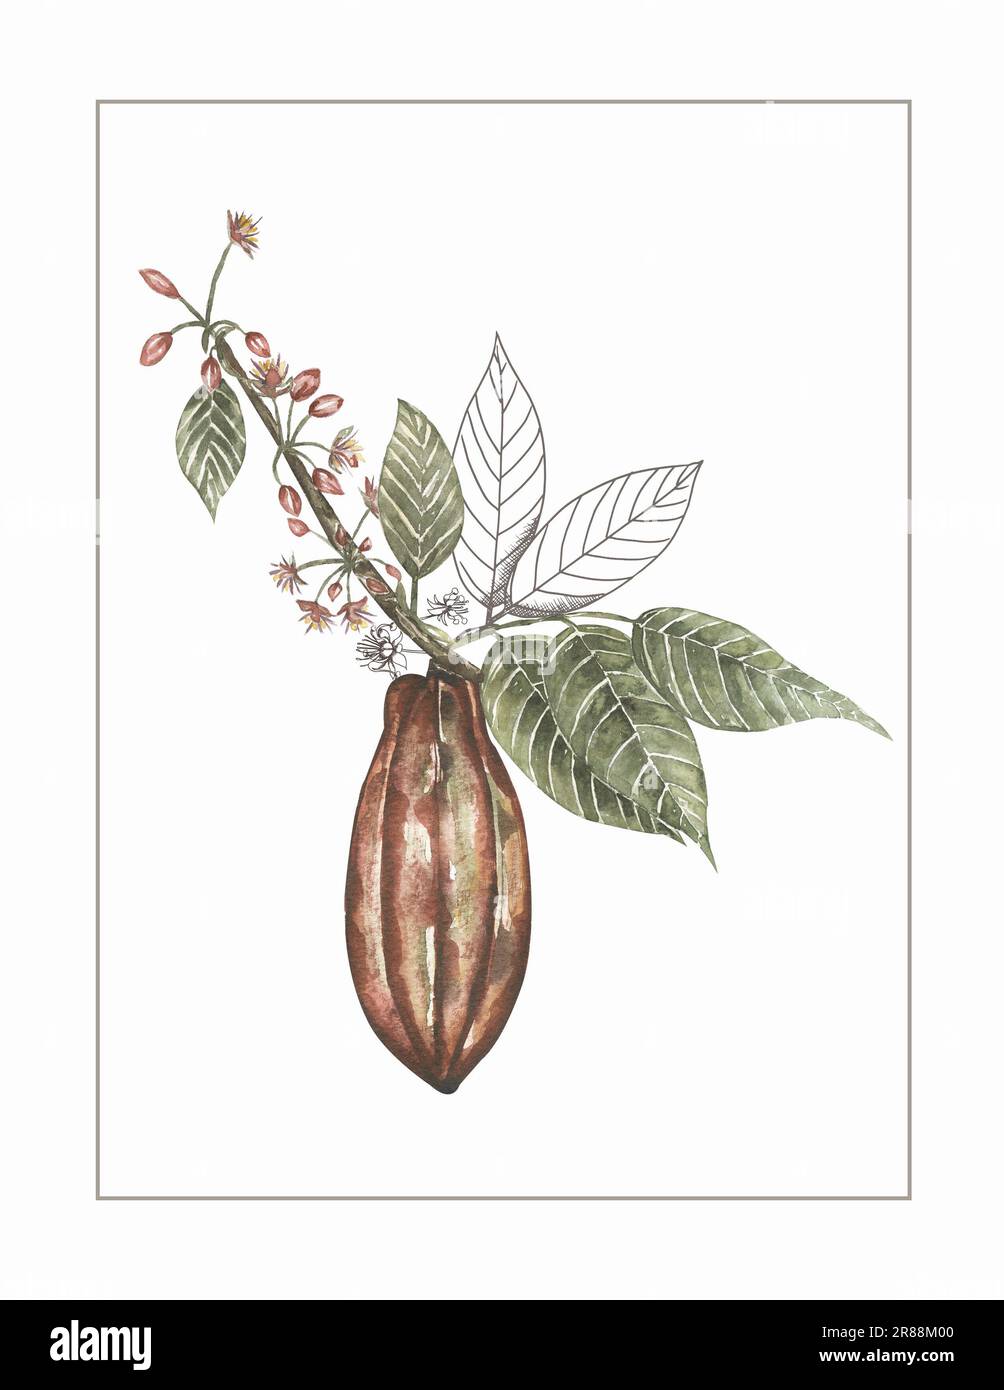 Cocoa pods with green leaves poster. Superfood clipart. Watercolor hand drawn floral illustration, cacao wall art, card design Stock Photo